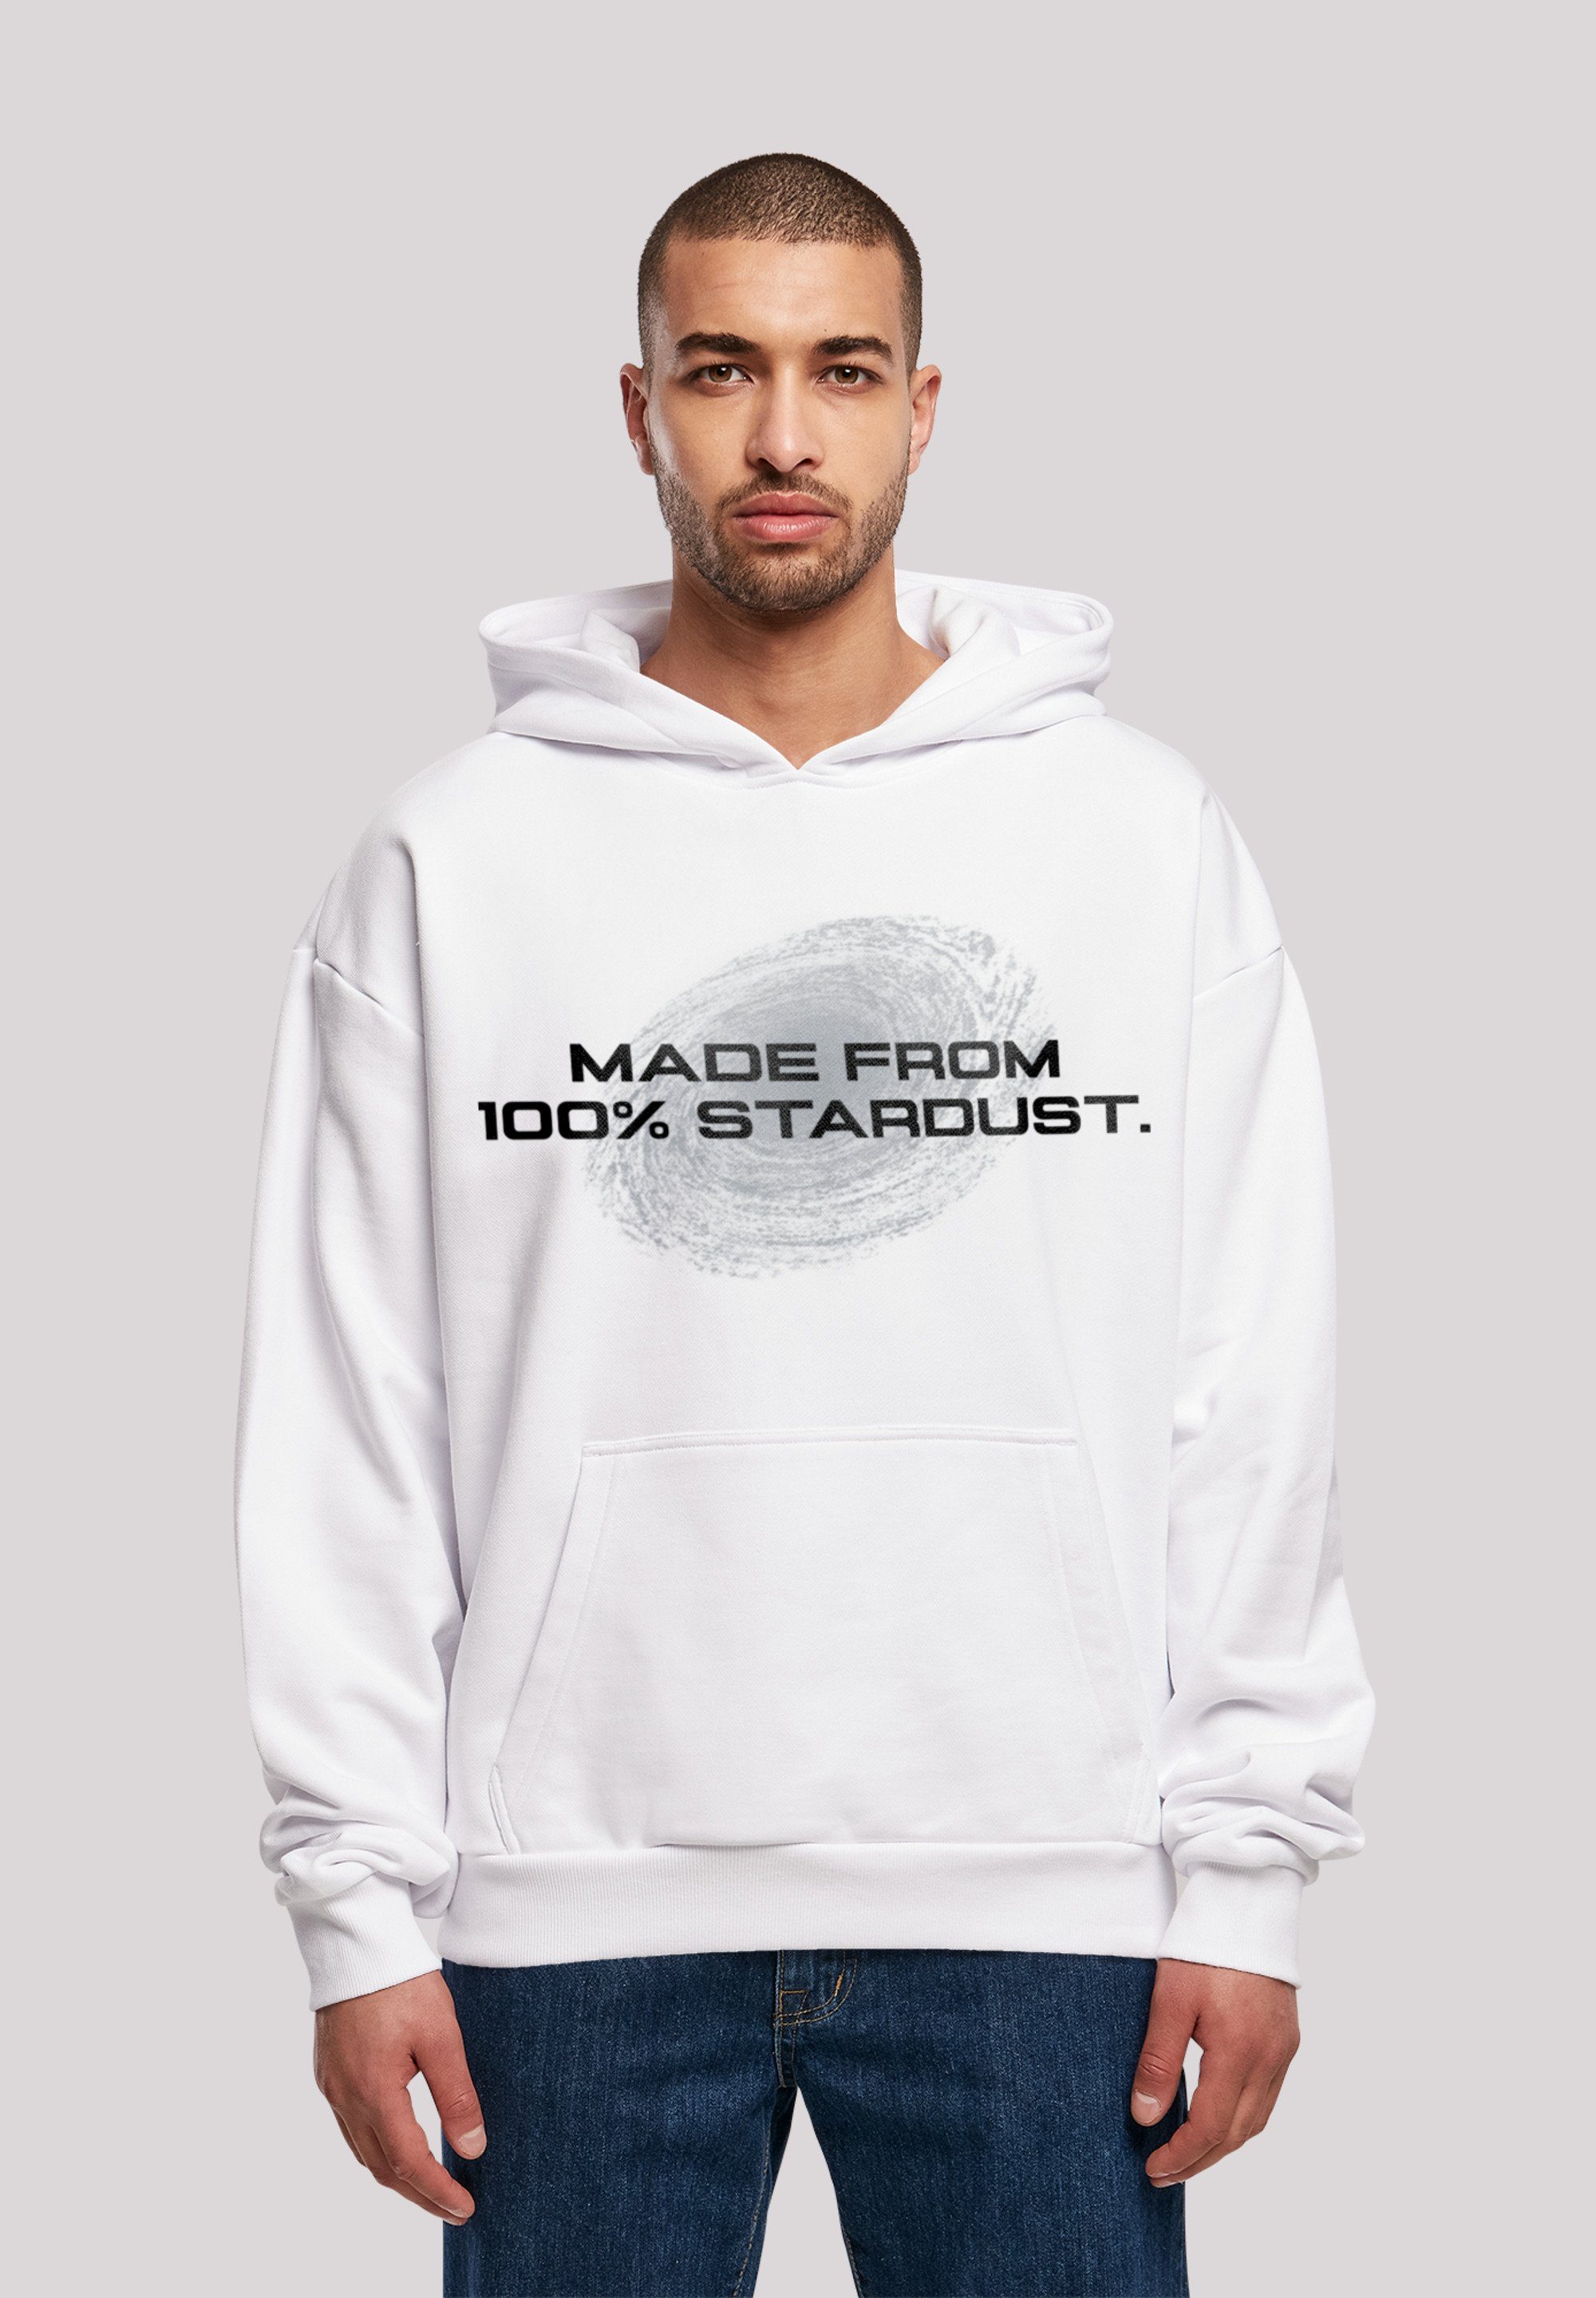 F4NT4STIC Kapuzenpullover PHIBER SpaceOne MADE FROM 100% STARDUST Print,  PHIBER SpaceOne MADE FROM 100 PERCENT STARDUST | Hoodies